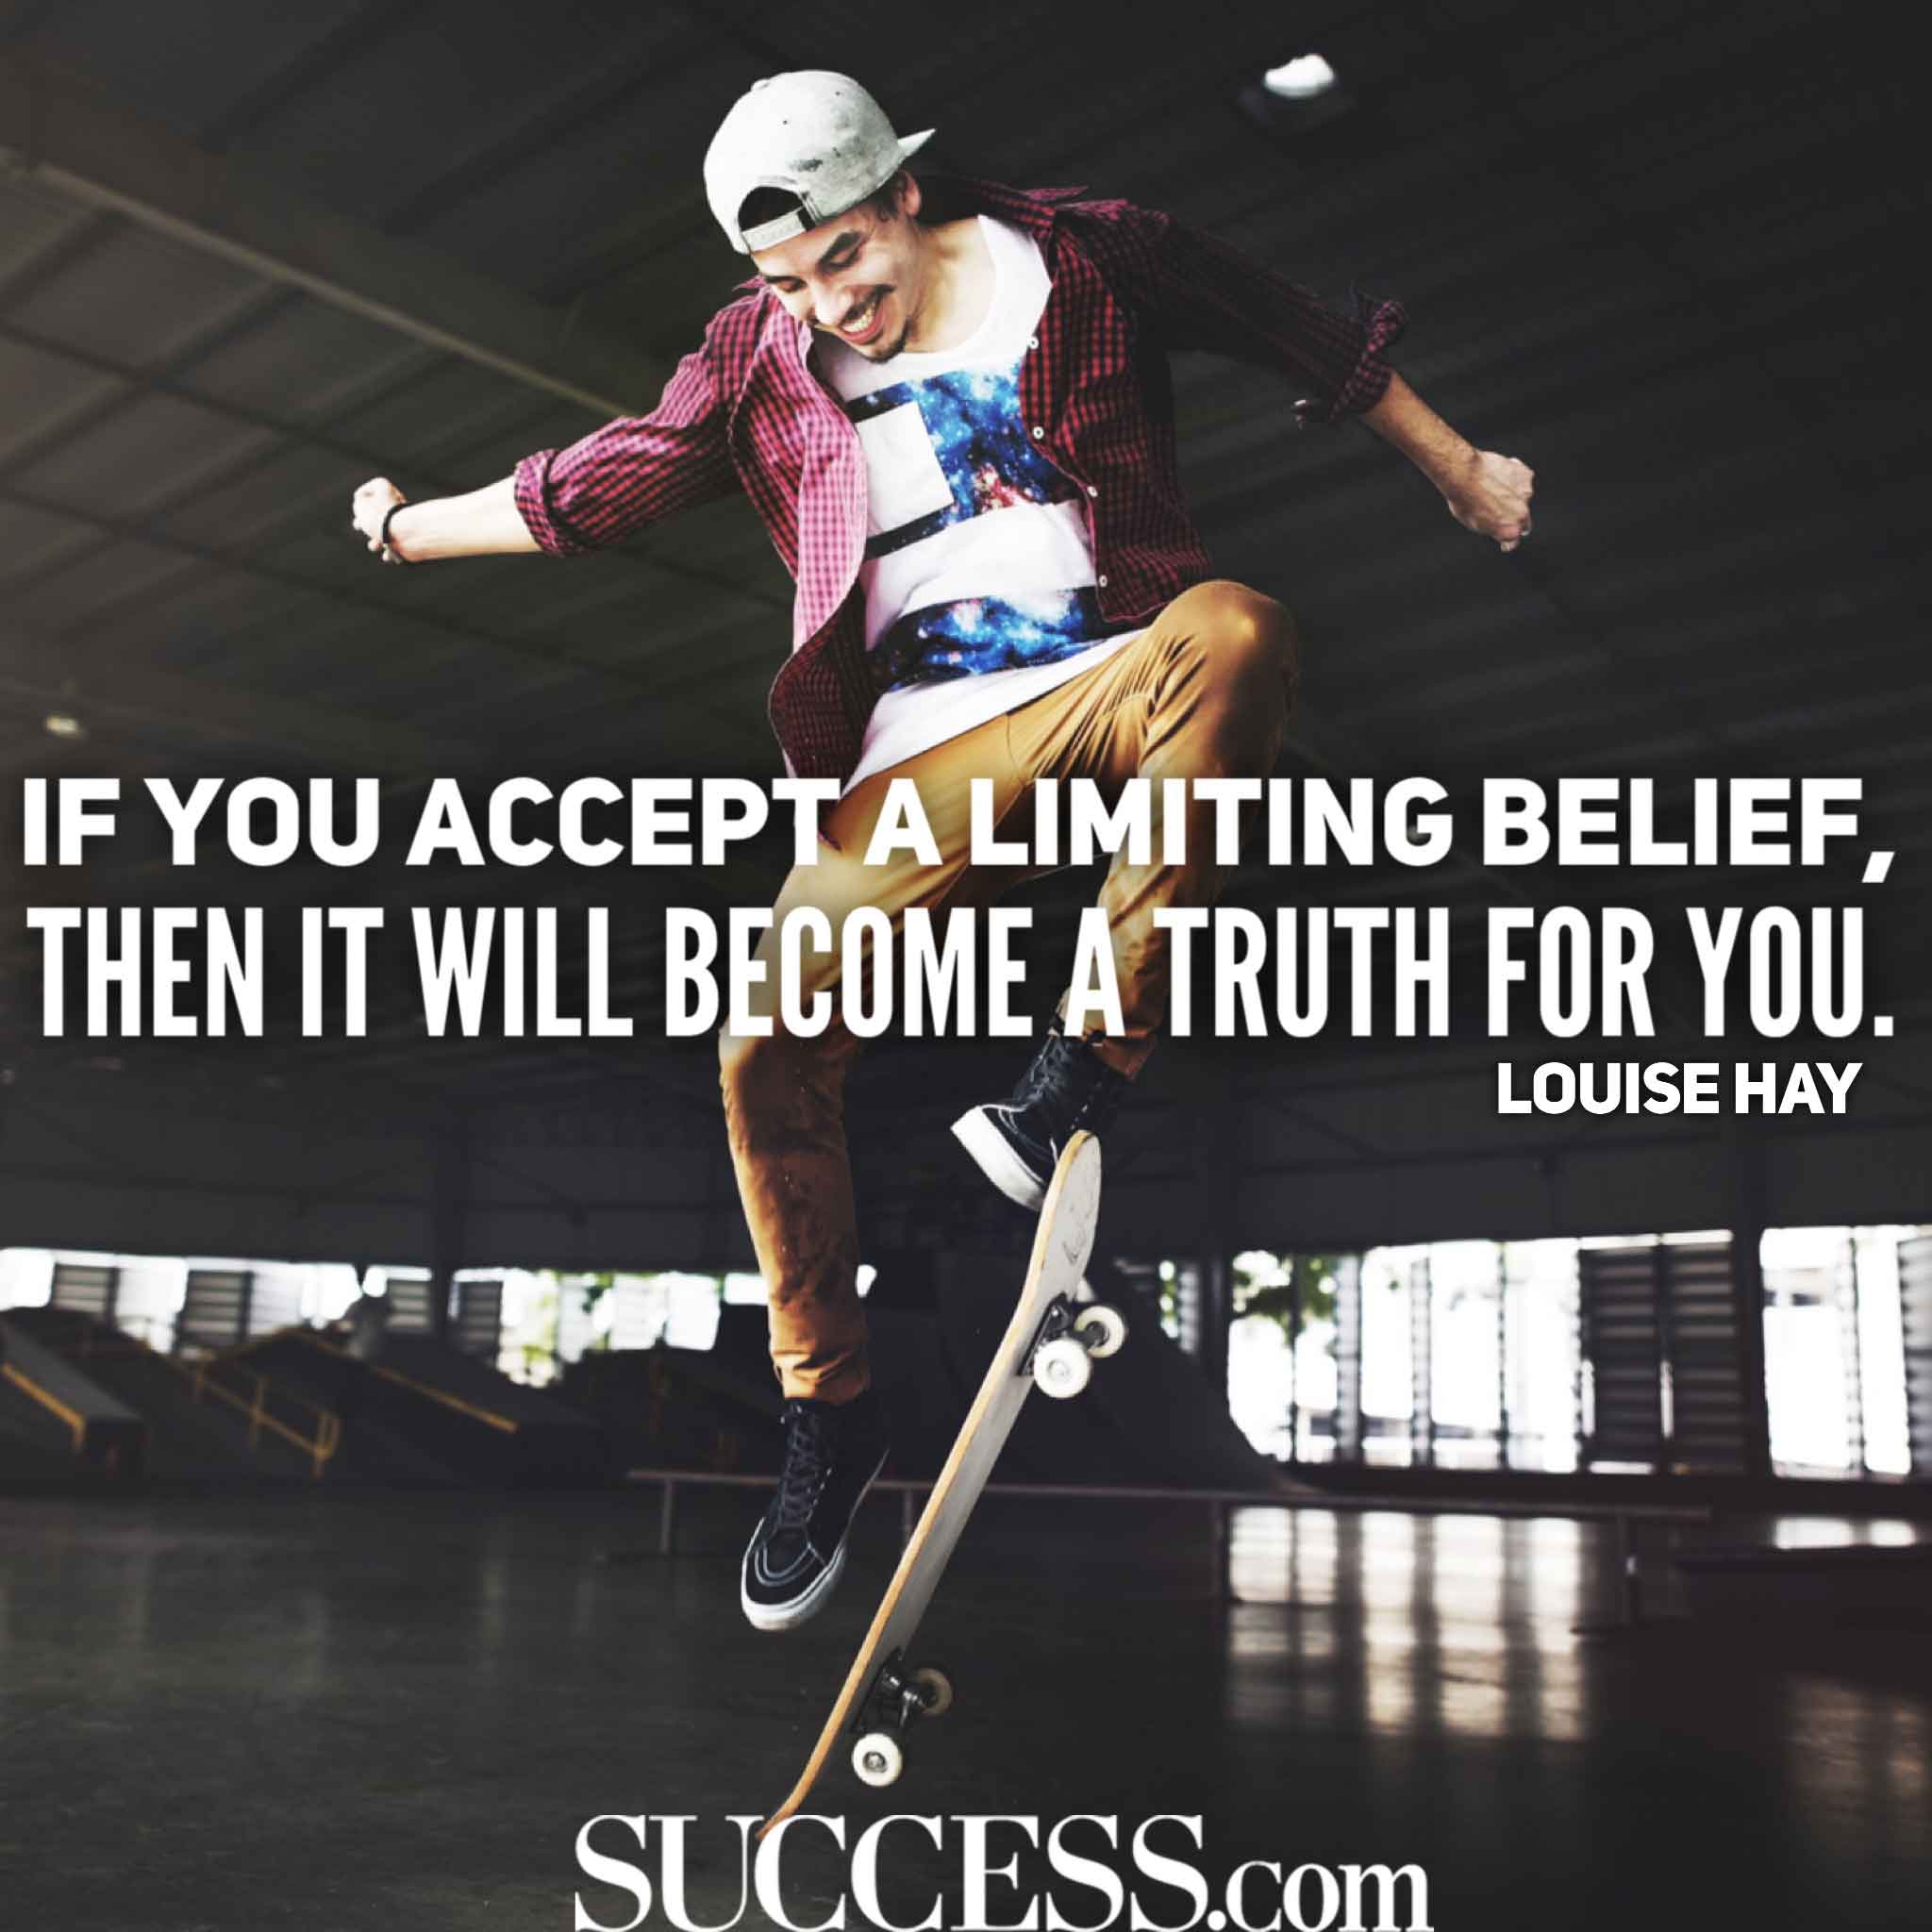 15 Quotes to Overcome Your Self-Limiting Beliefs